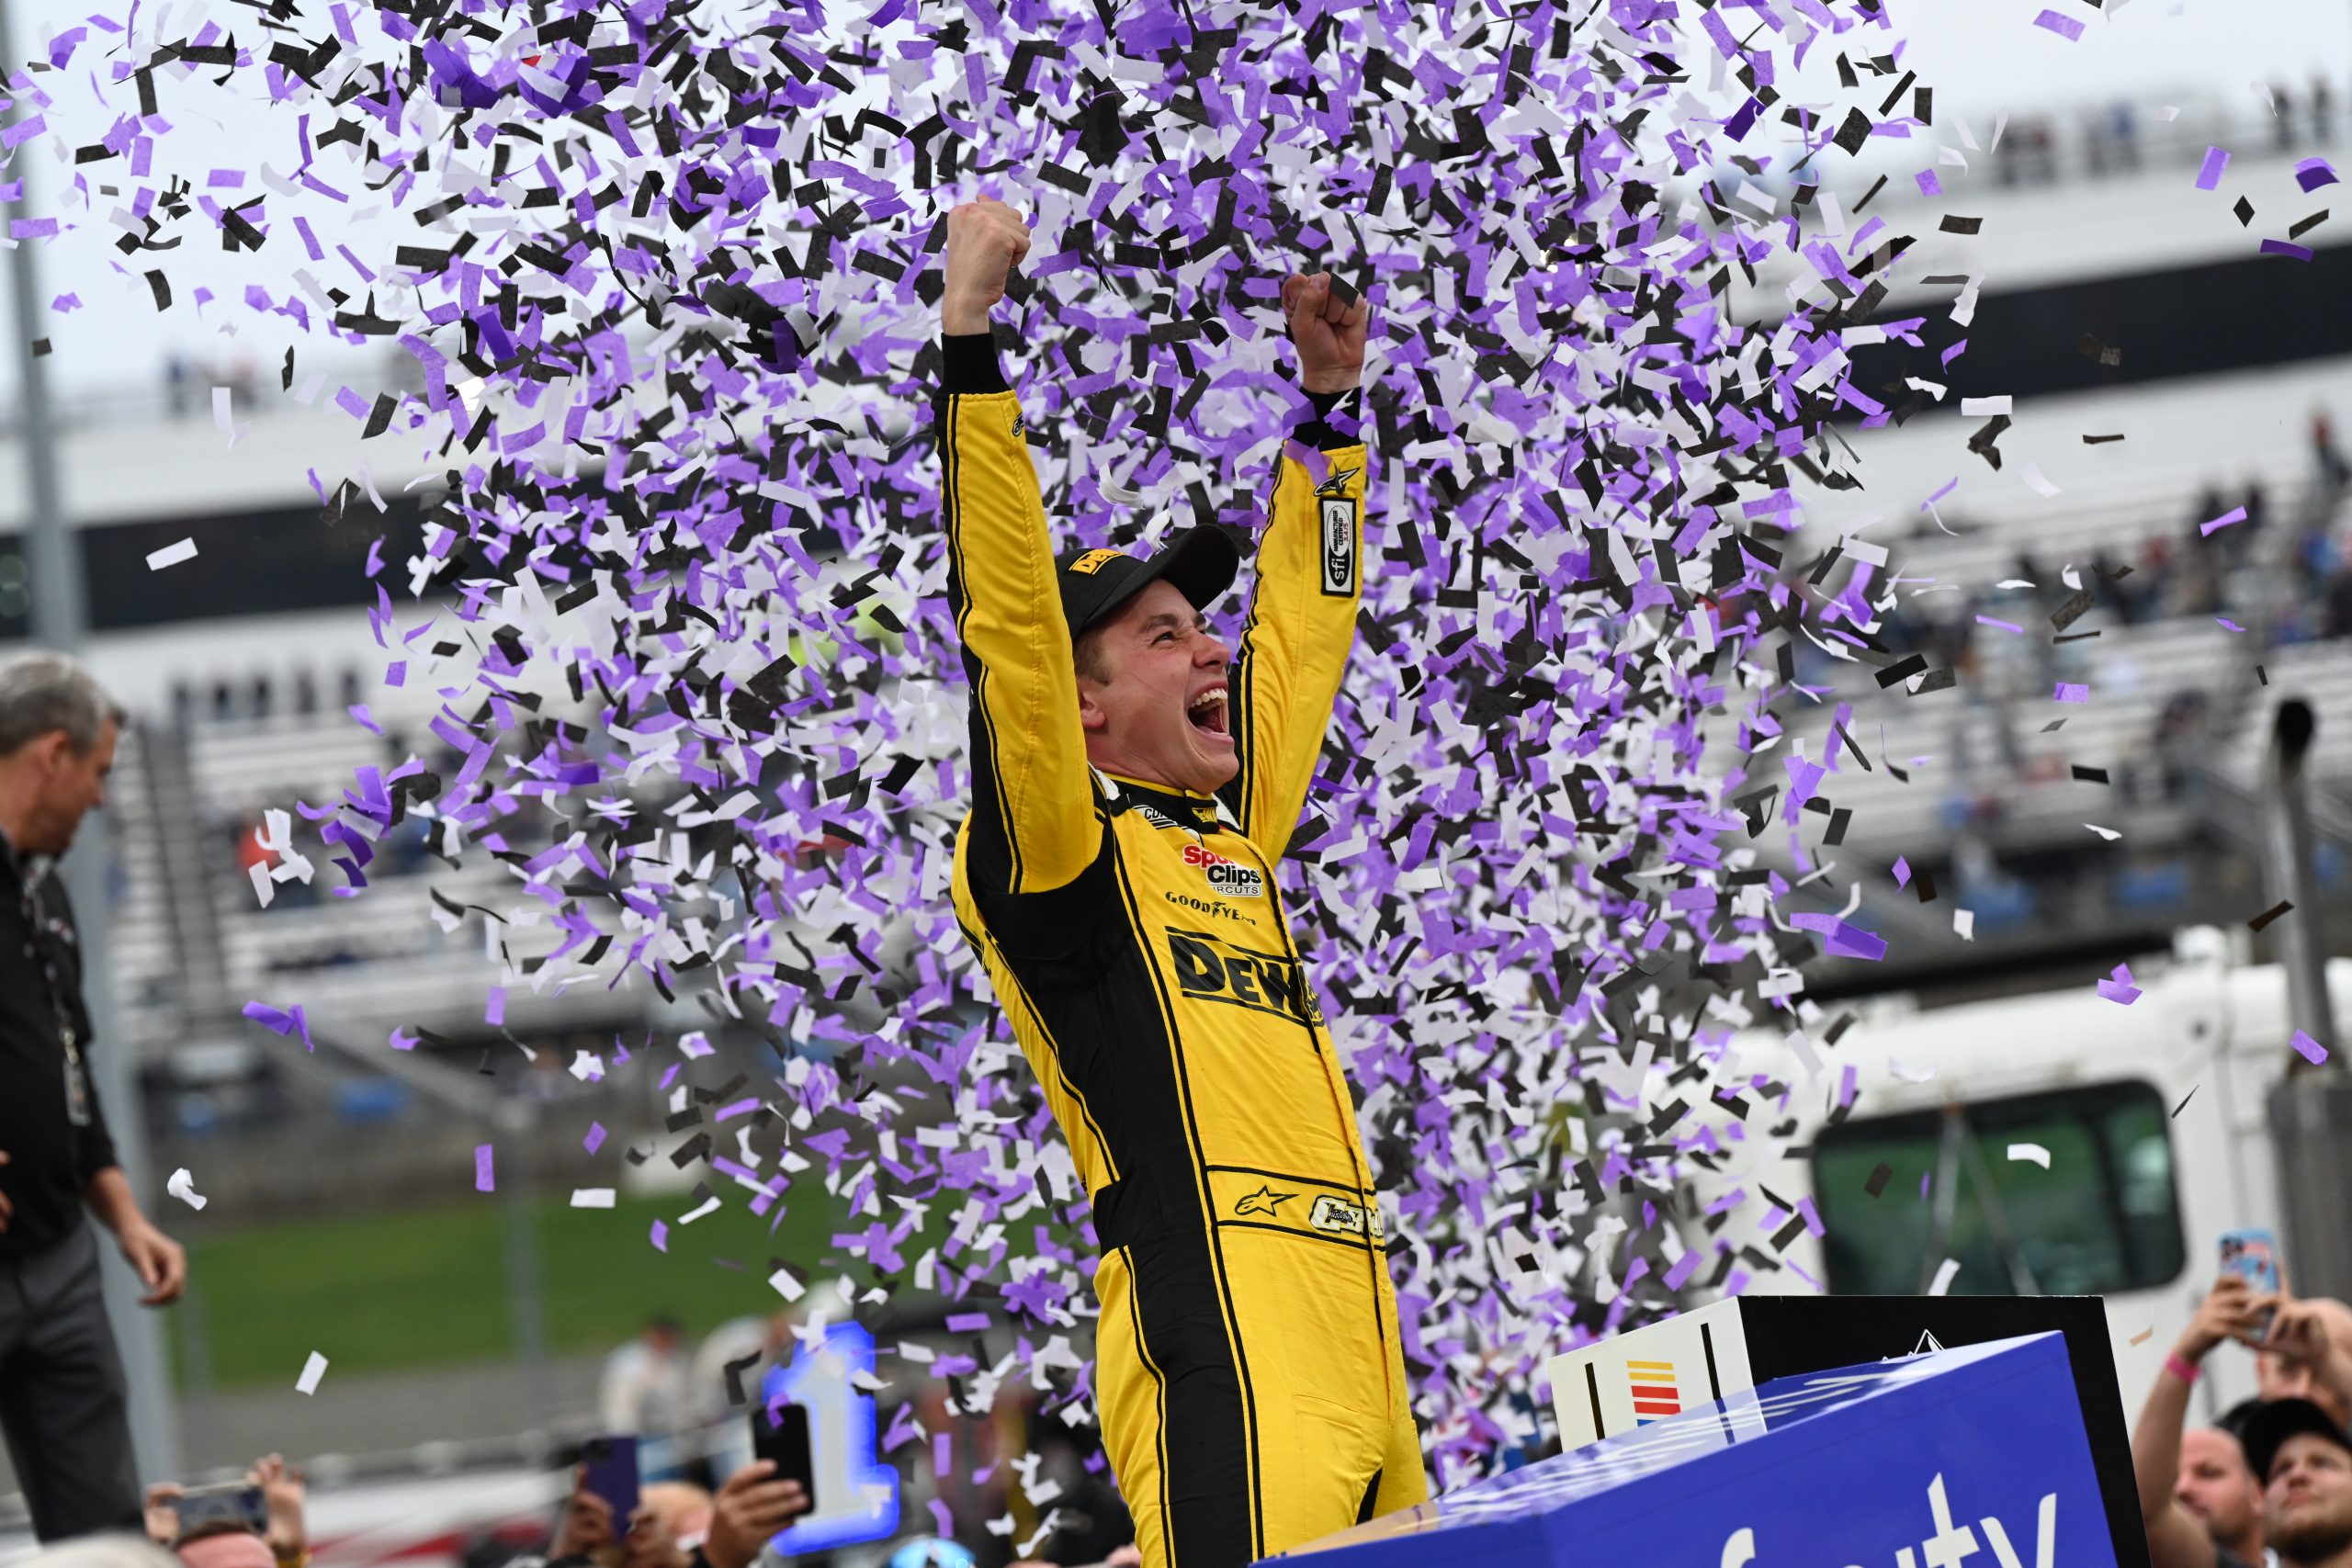 Christopher Bell rang his way into the Championship 4 with a dramatic Xfinity 500 win at Martinsville. (Photo: Kevin Ritchie | The Podium Finish)